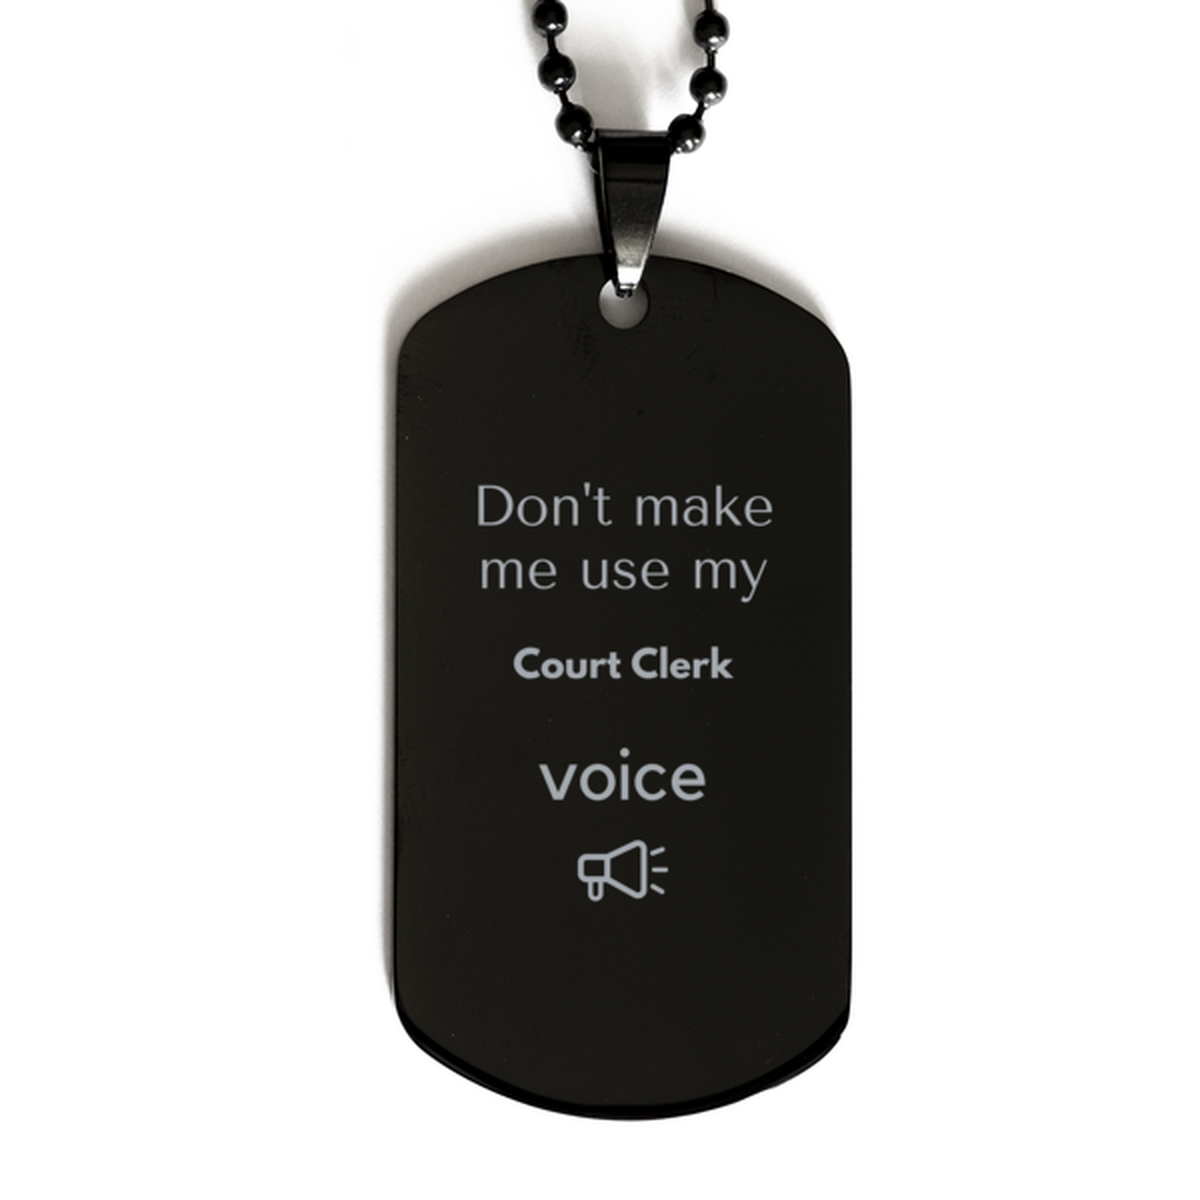 Don't make me use my Court Clerk voice, Sarcasm Court Clerk Gifts, Christmas Court Clerk Black Dog Tag Birthday Unique Gifts For Court Clerk Coworkers, Men, Women, Colleague, Friends